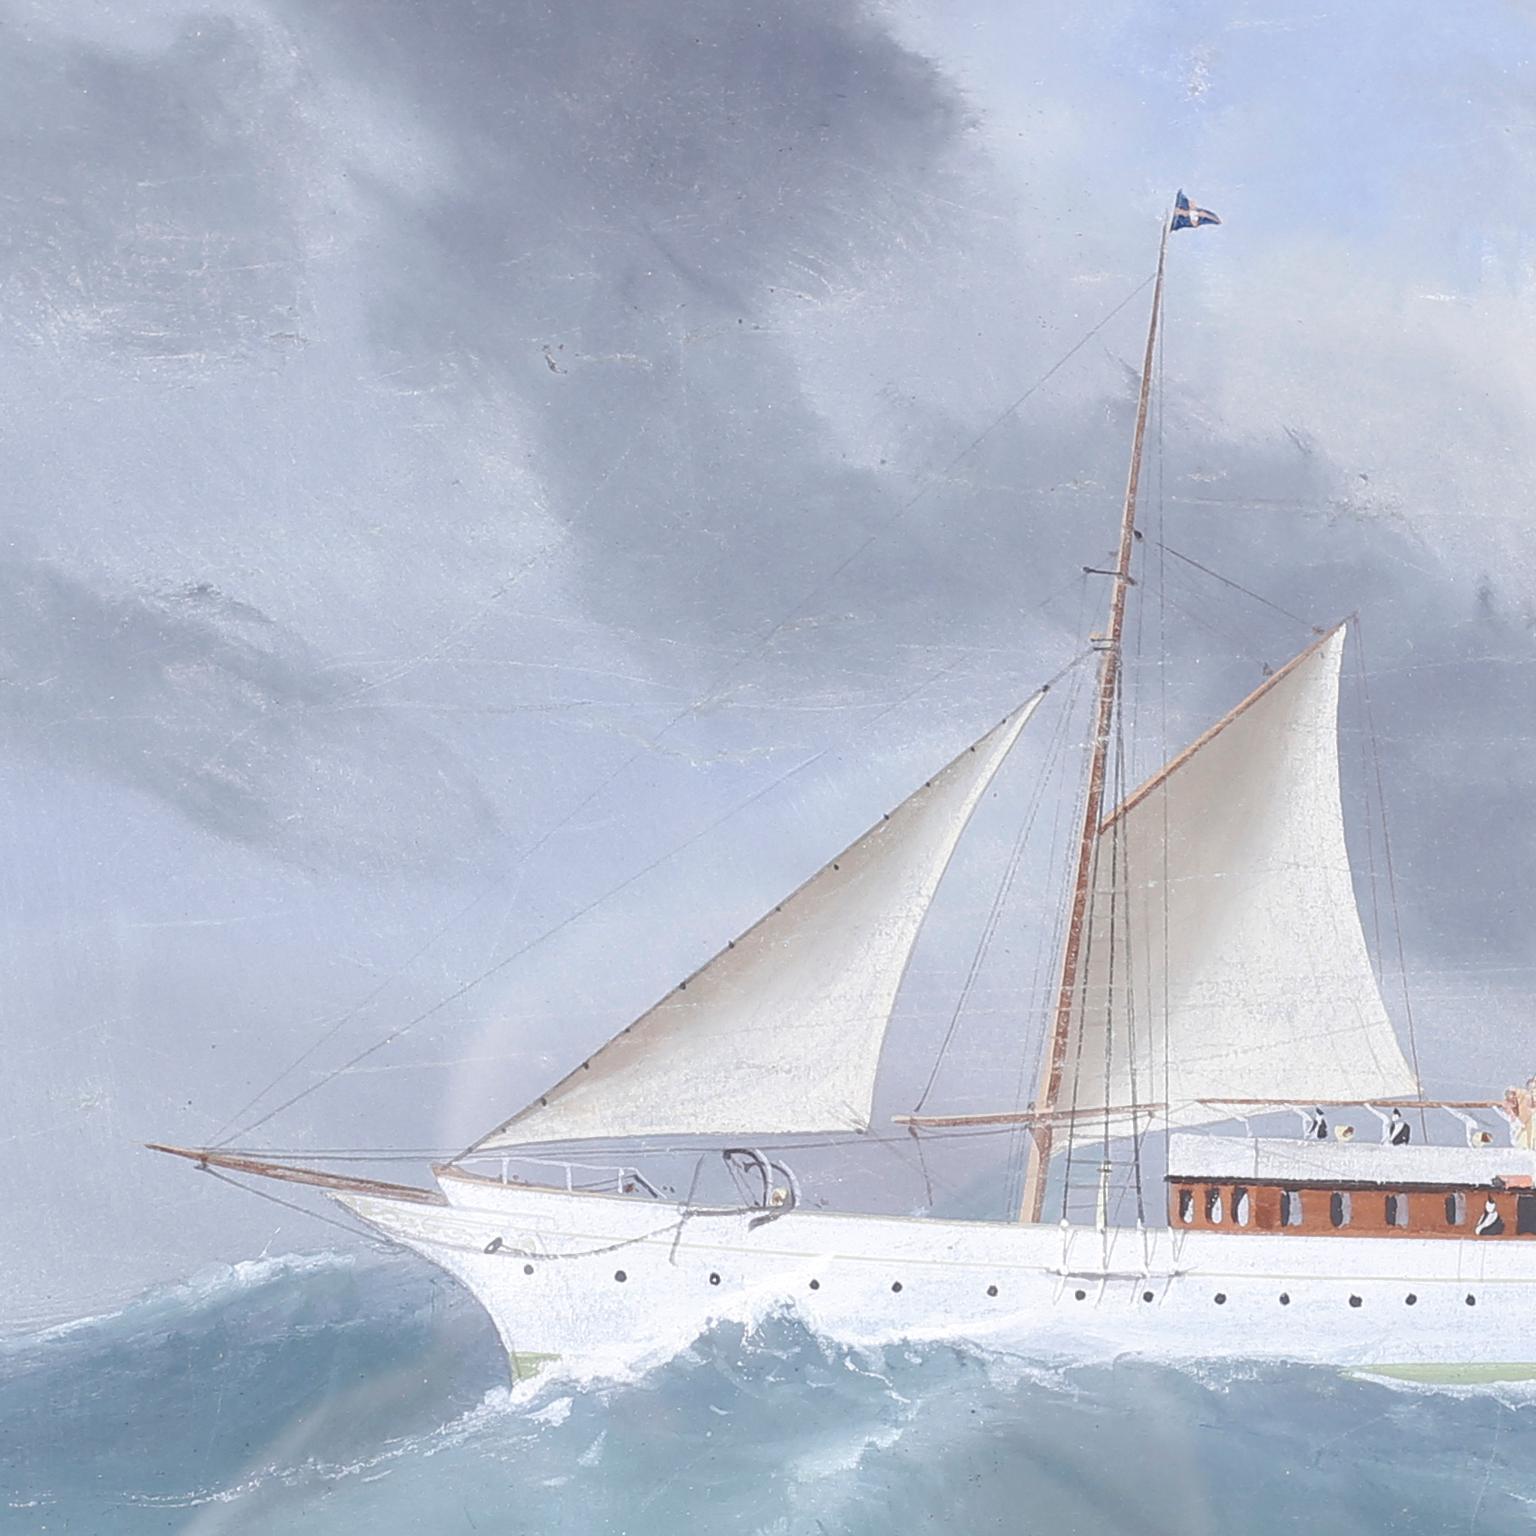 Gouache paint on paper of the steam sail yacht or schooner 